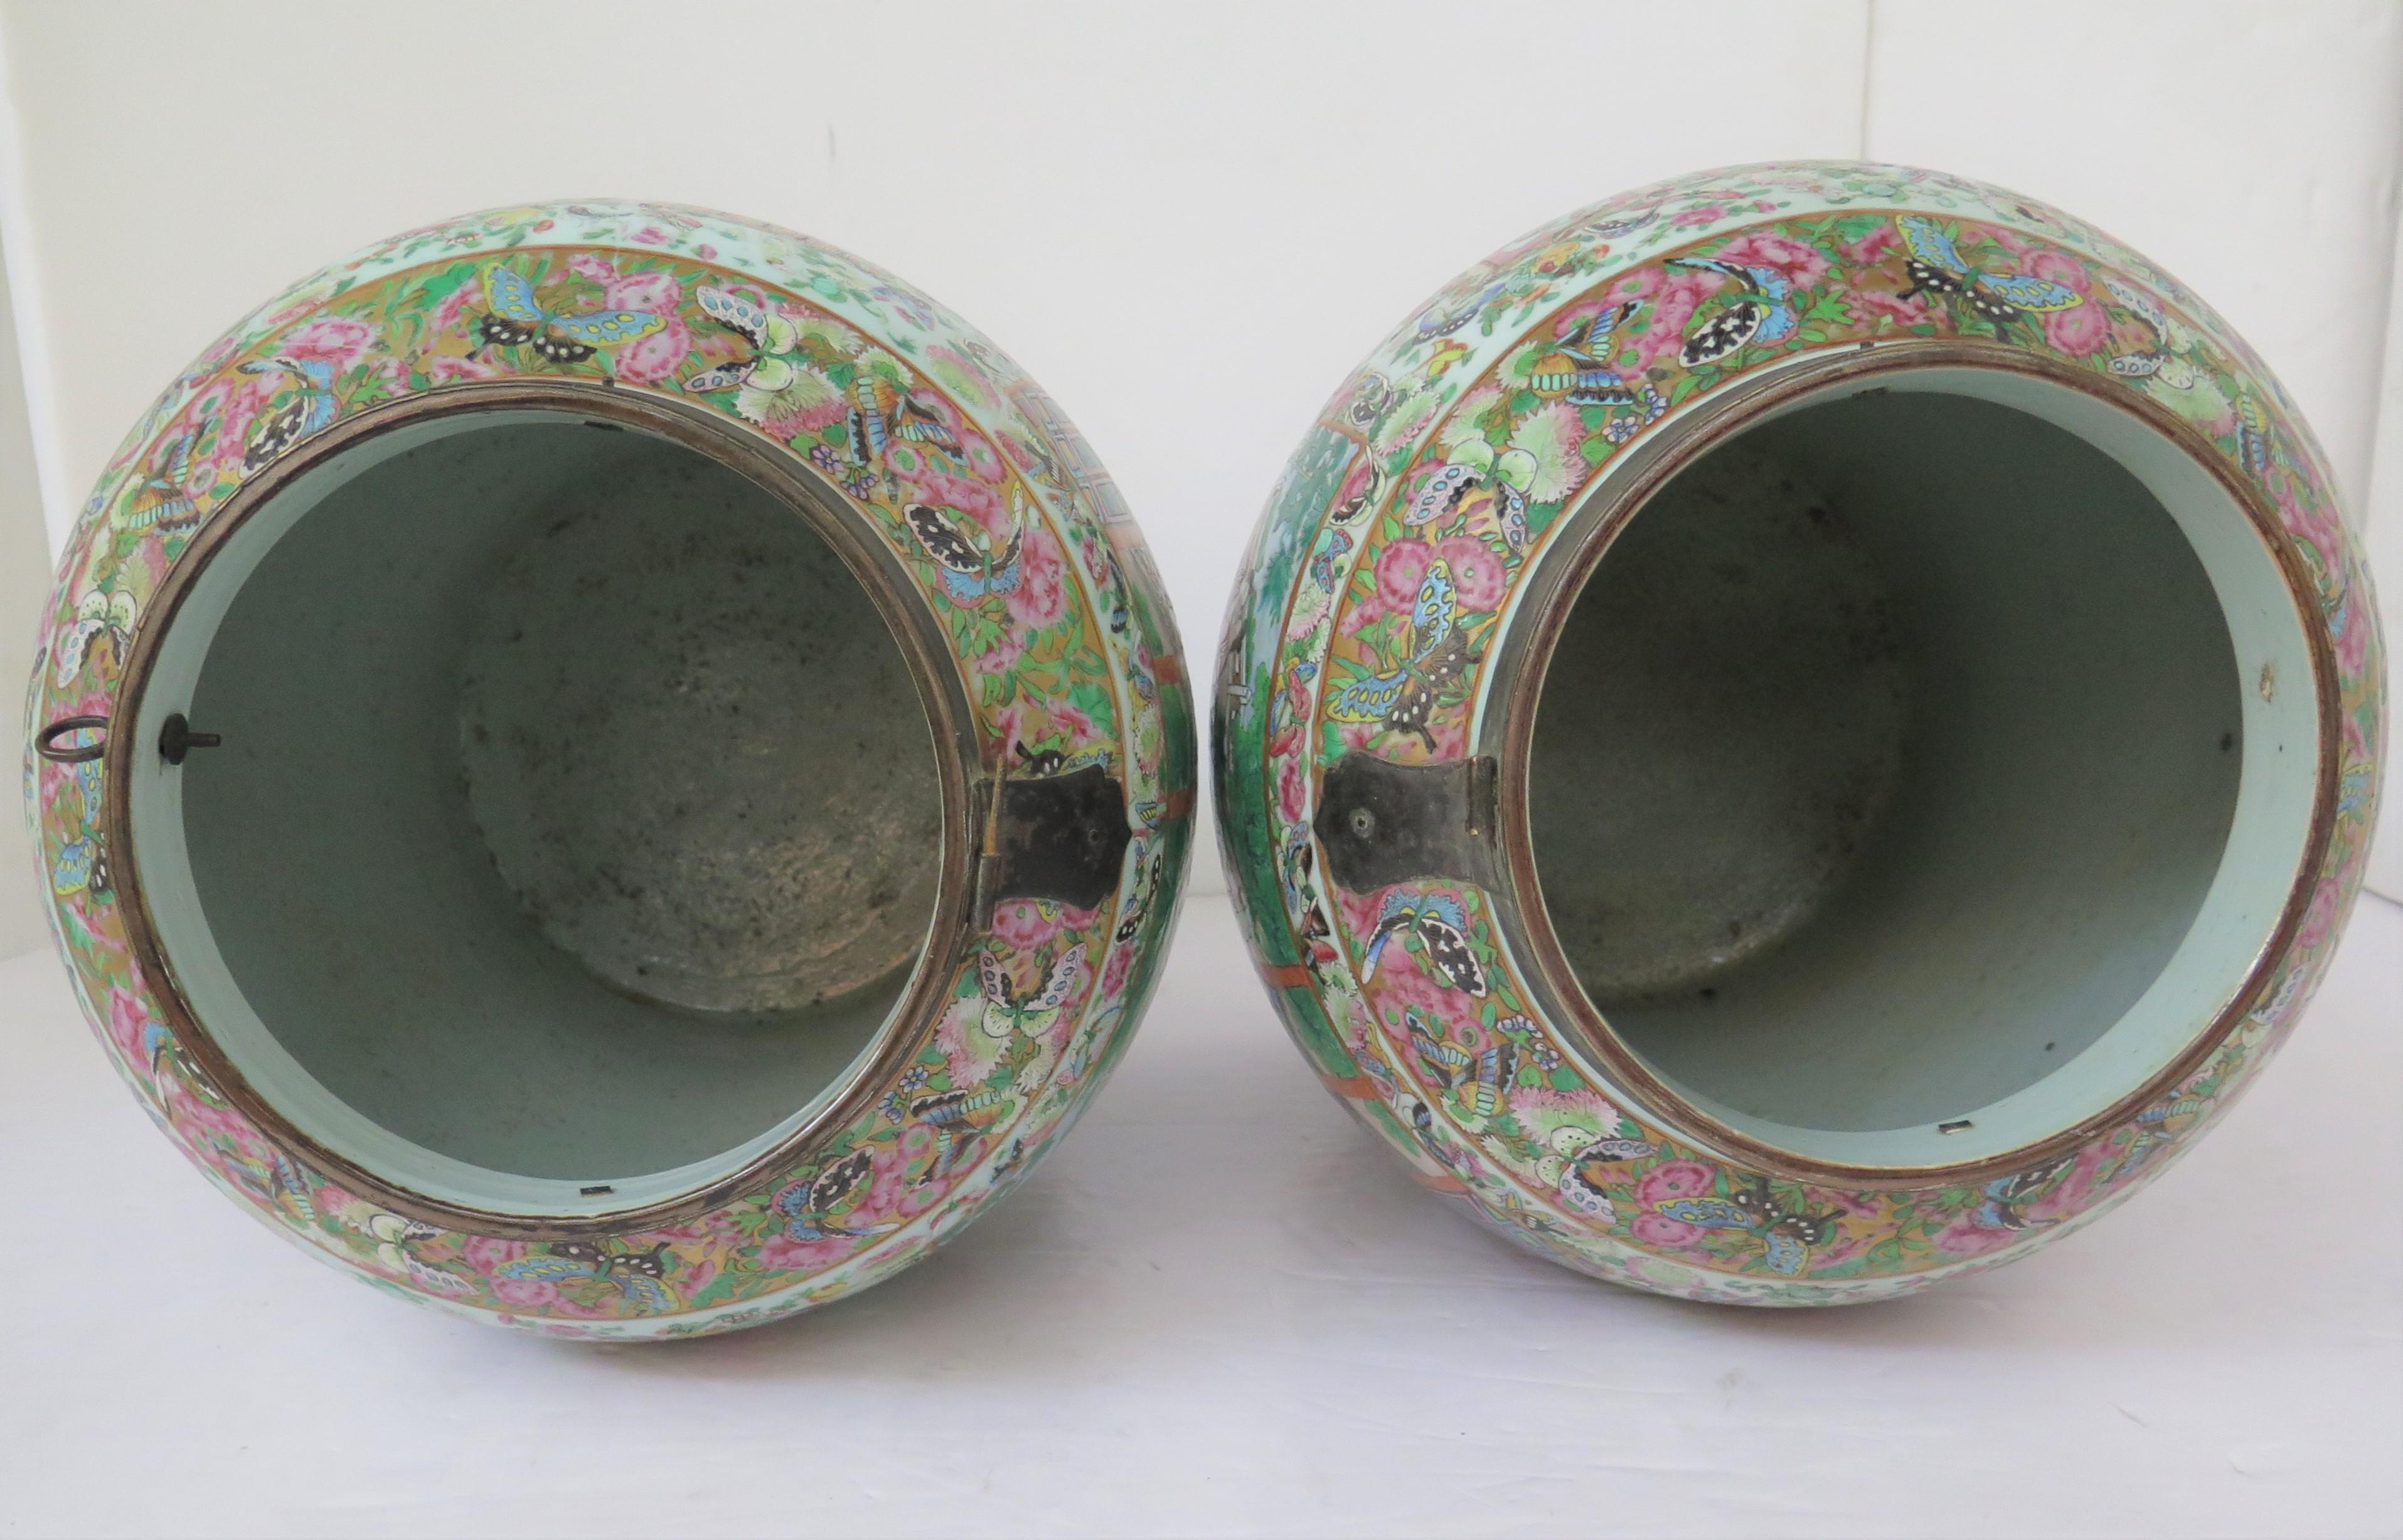 A Pair of Late 18th-Early 19th Century Chinese Lidded Jars  For Sale 4